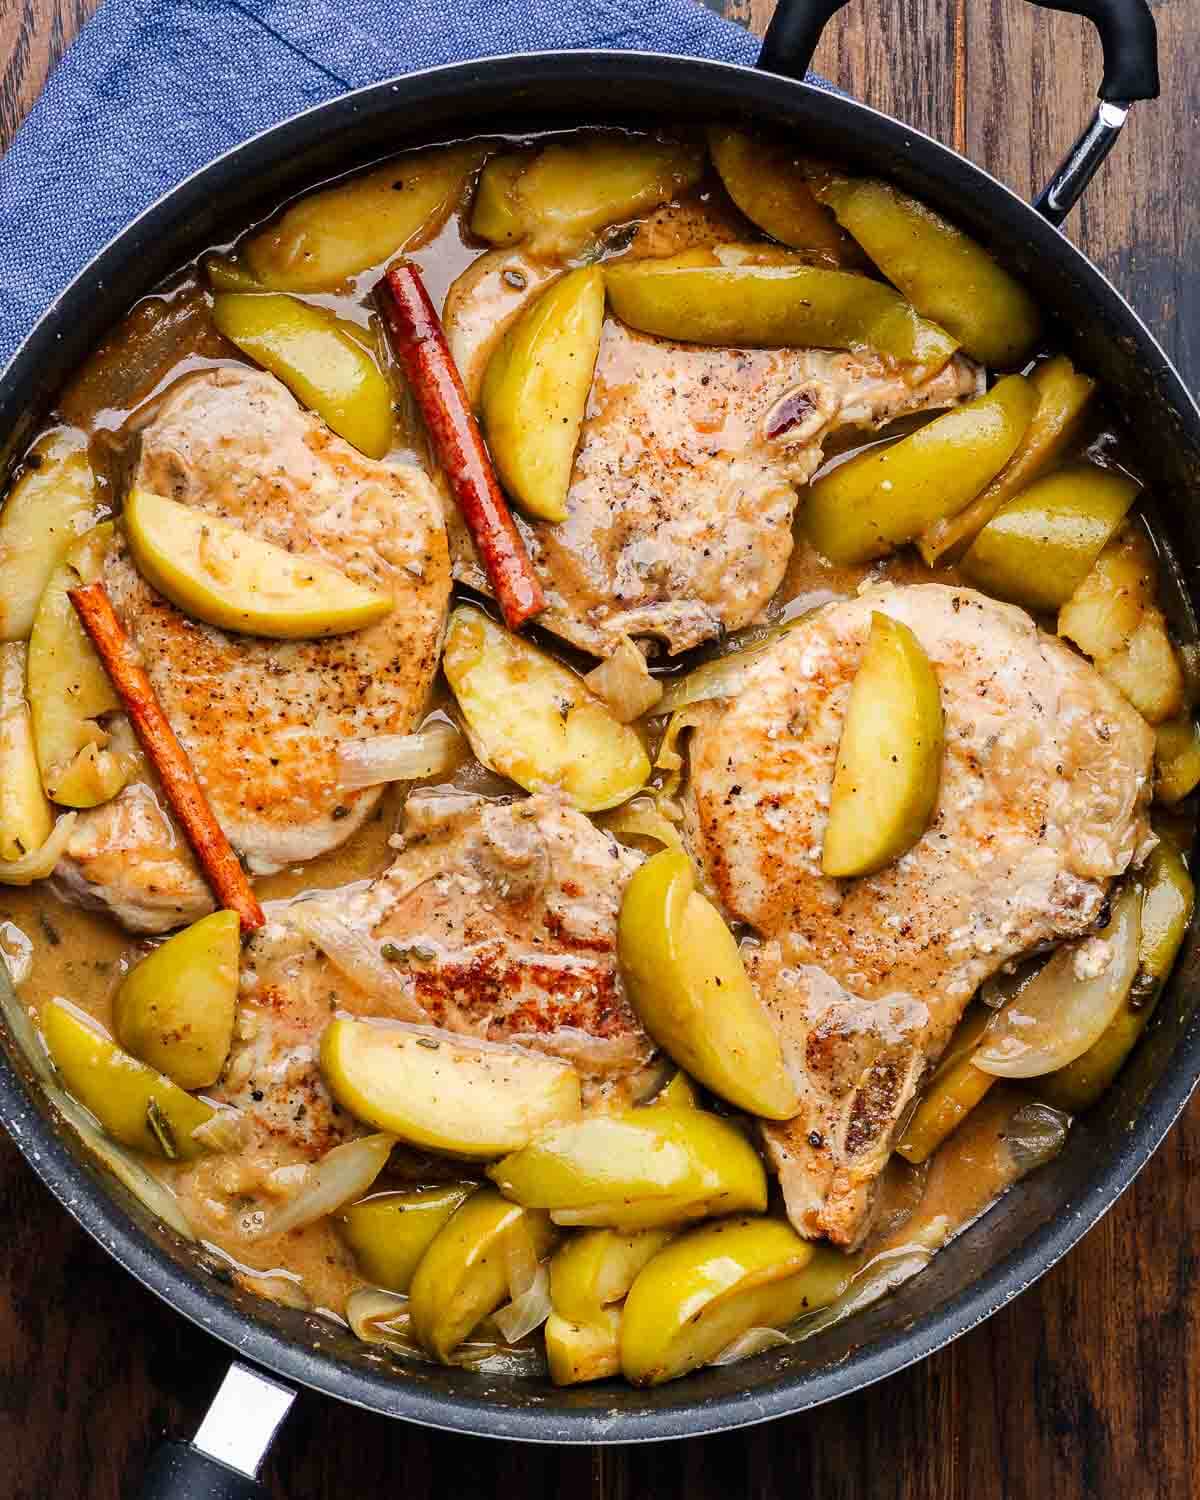 Overhead shot of large black pan with pork chops and apples.